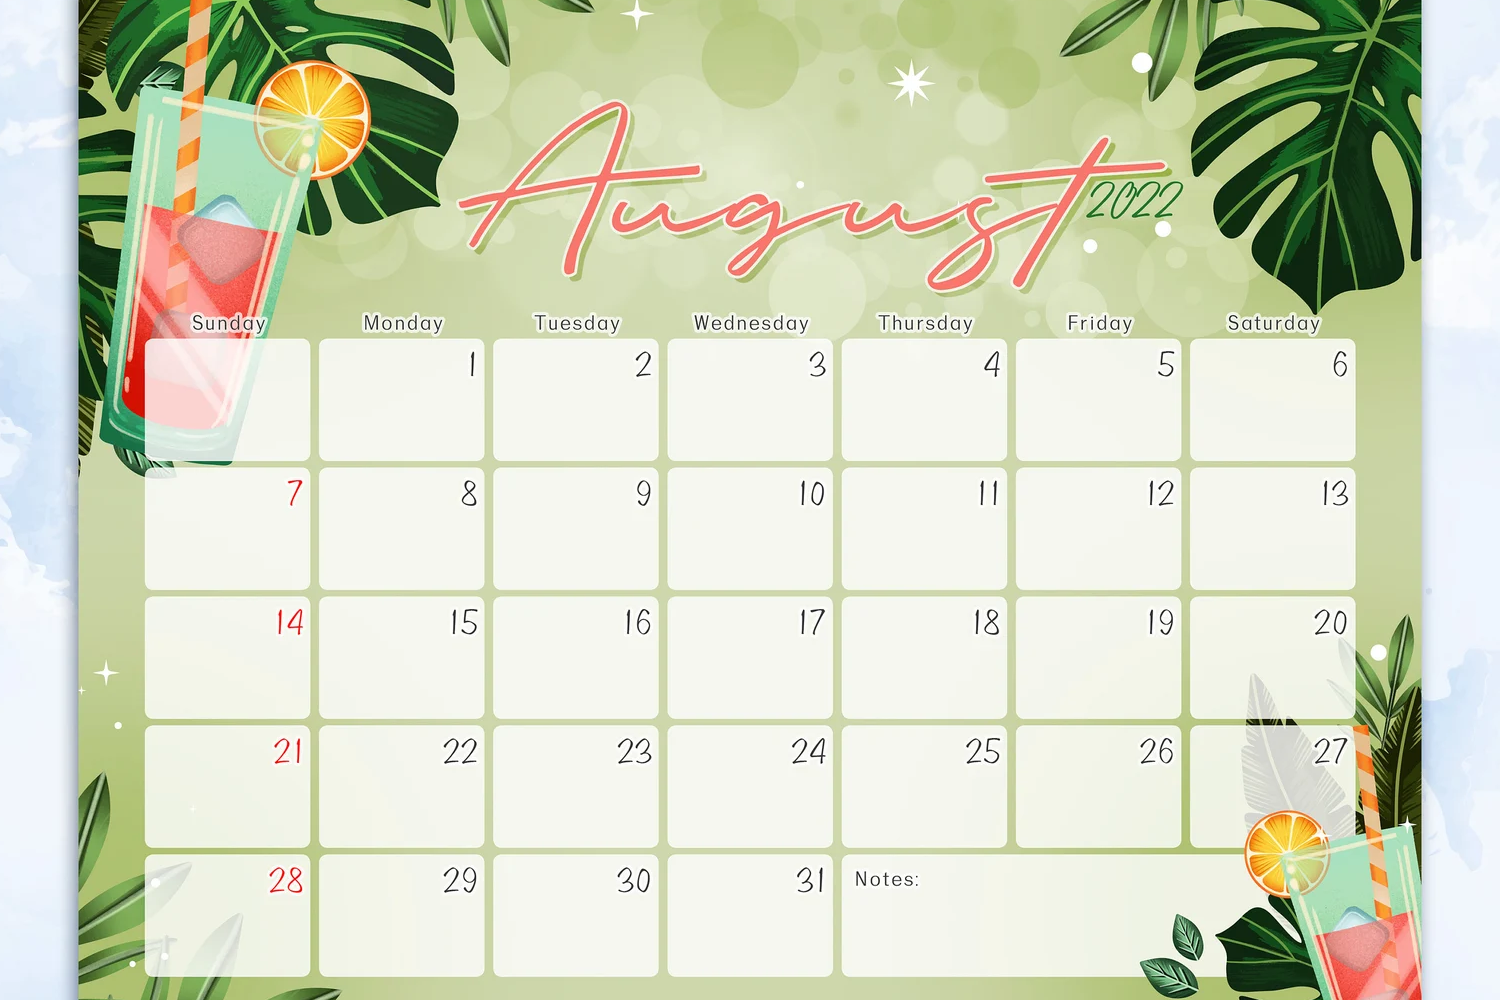 Calendar with palm trees and cold drinks on a green background.